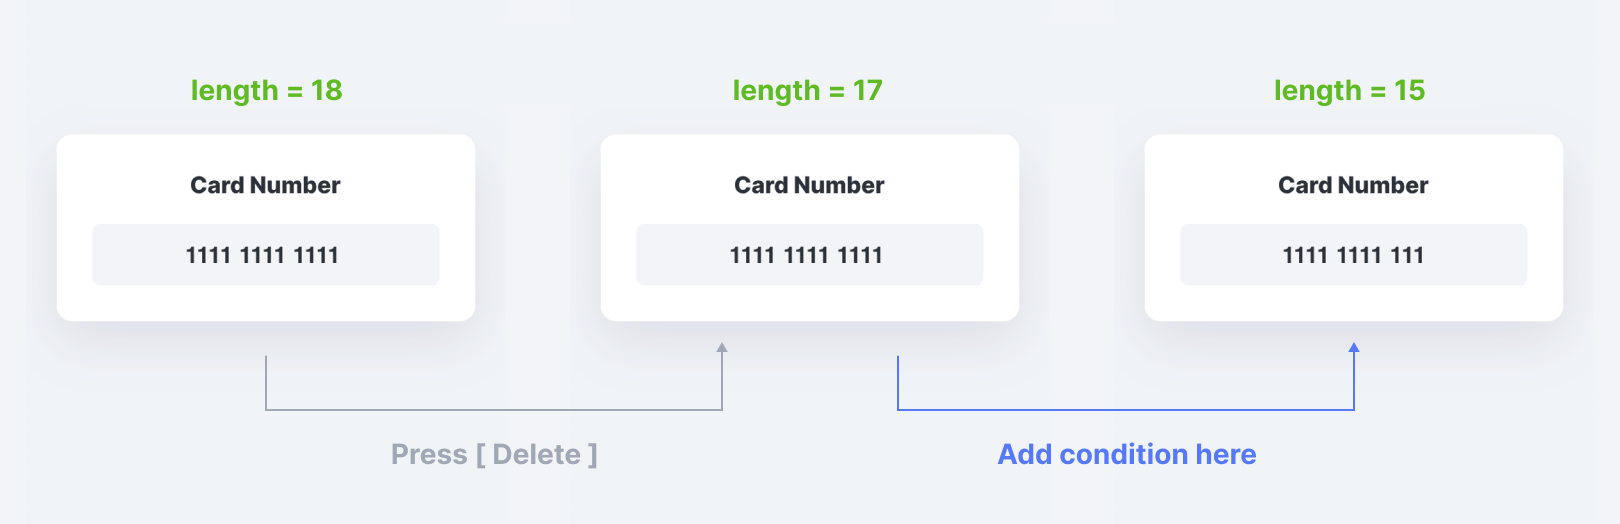 Photo showing how adding this new condition once the length = 17 would allow the prototype to delete the characters down to 15.